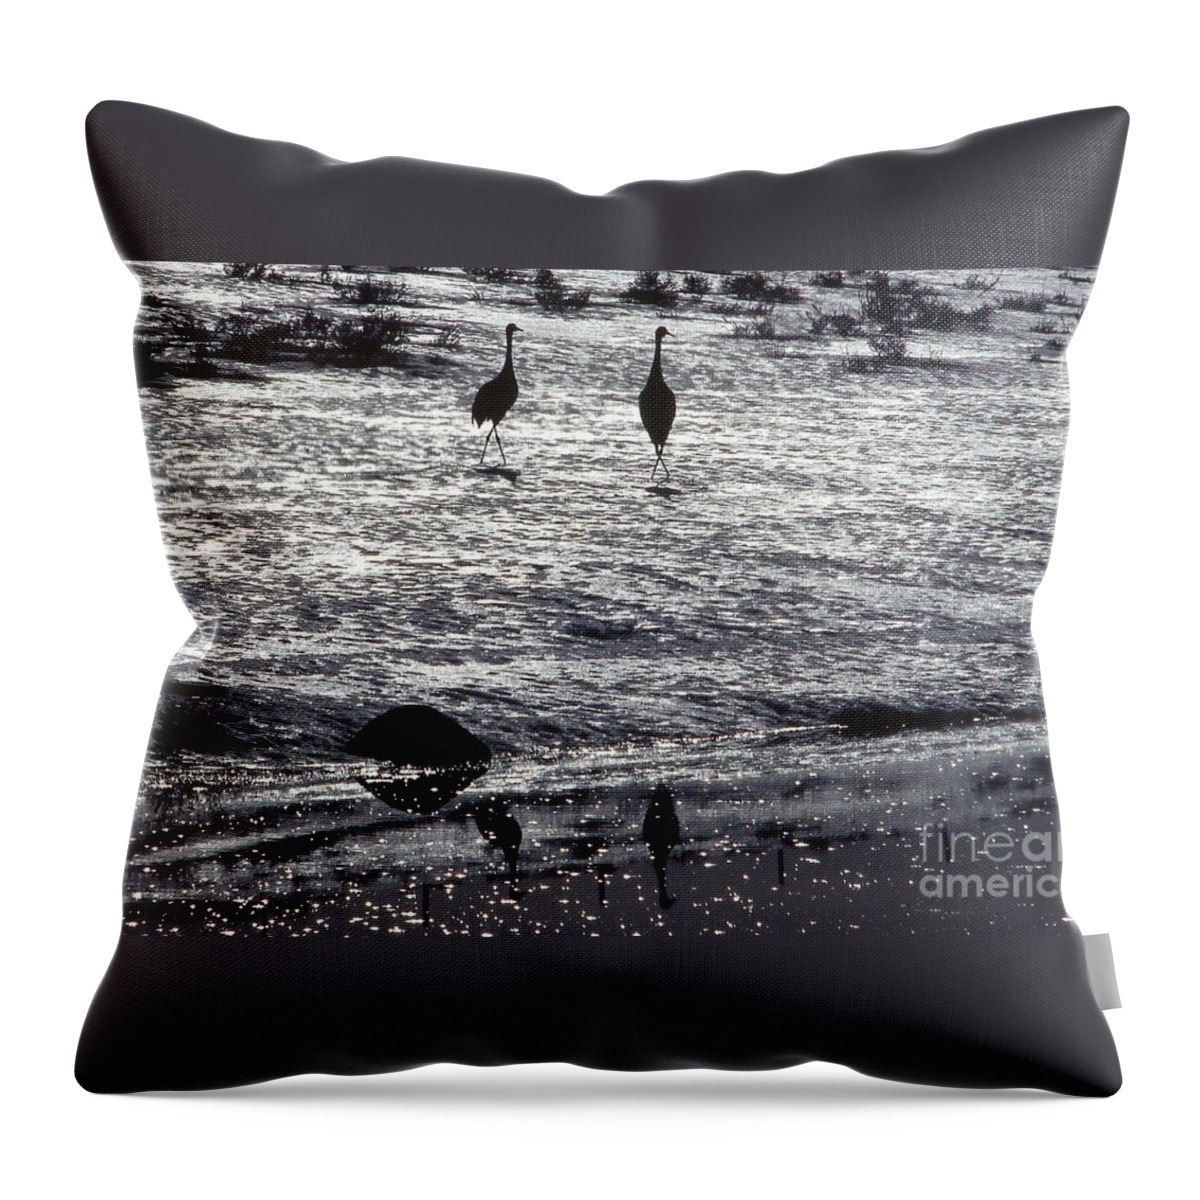 Sand Hill Cranes Throw Pillow featuring the photograph Sandhill Cranes black and white by Edward R Wisell